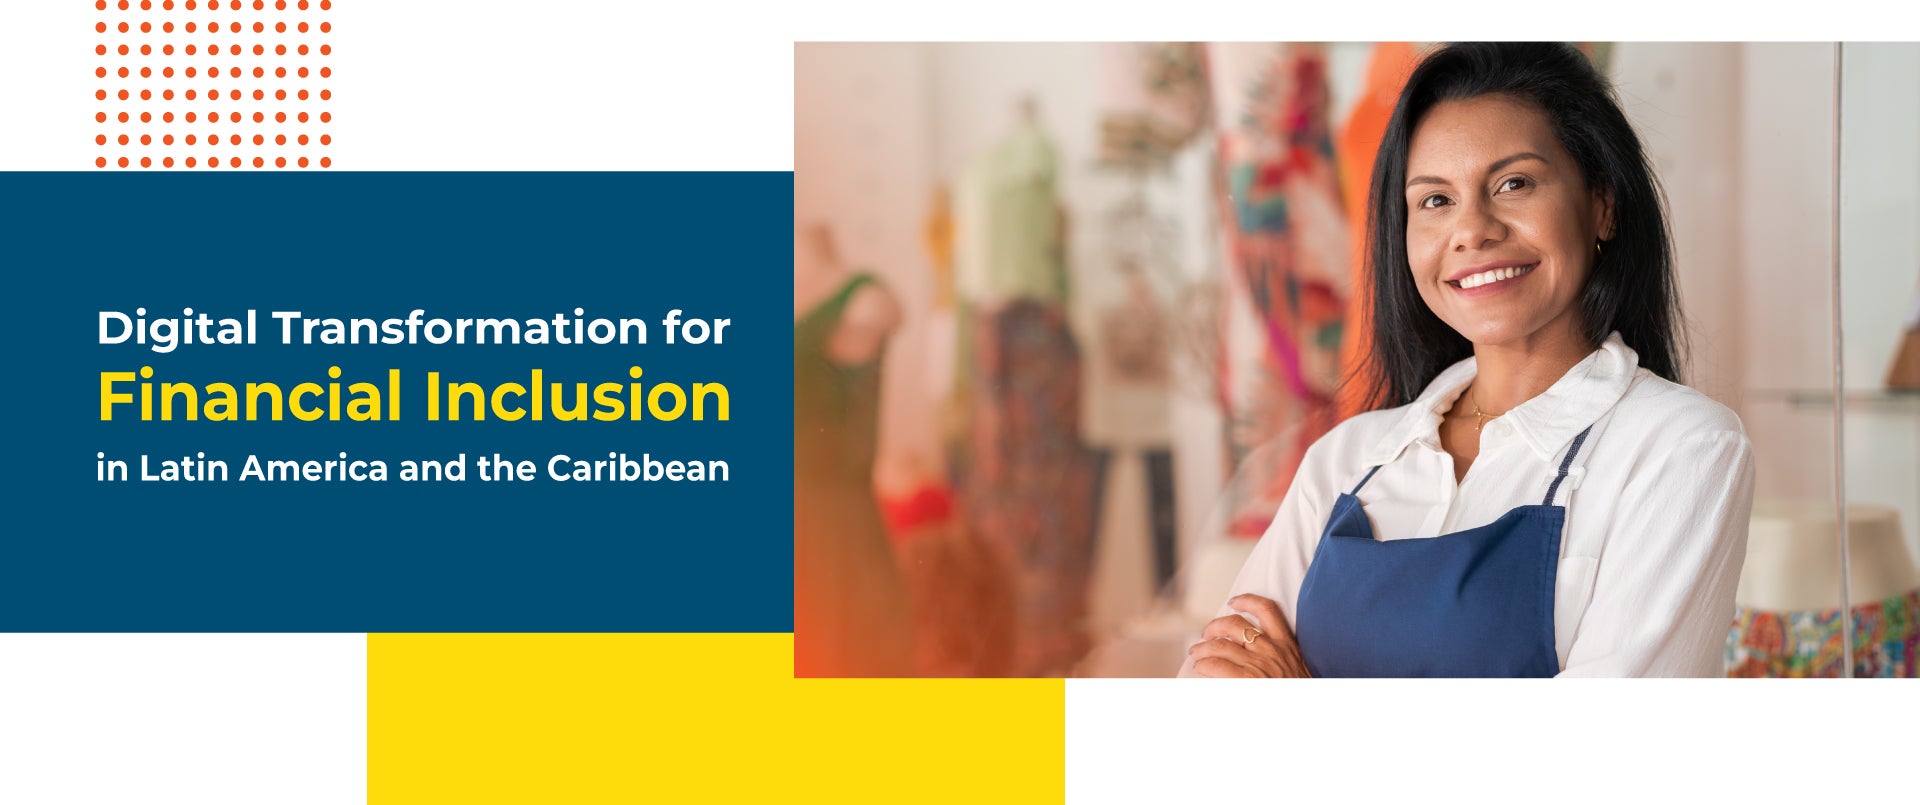 Digital Transformation for Financial Inclusion banner image